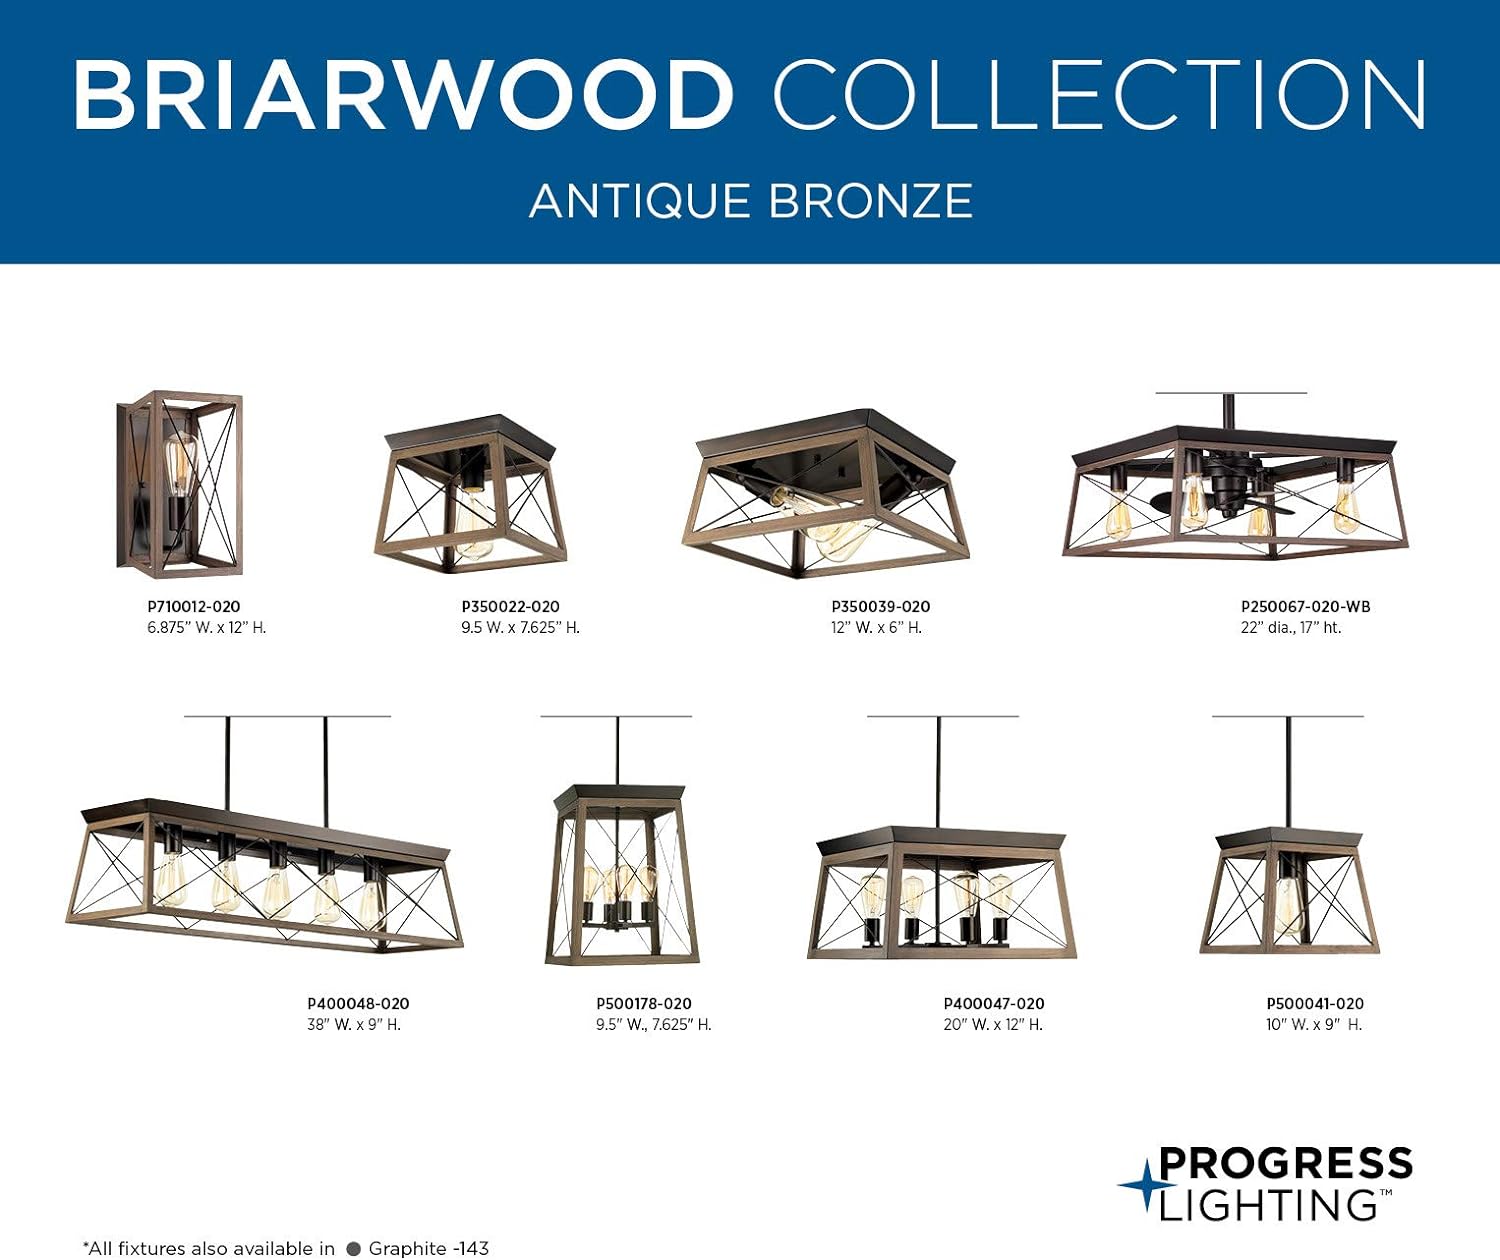 The Progress Lighting Briarwood Collection Antique Bronze Two-Light Farmhouse Flush Mount Ceiling Light: A Review of Rustic Elegance